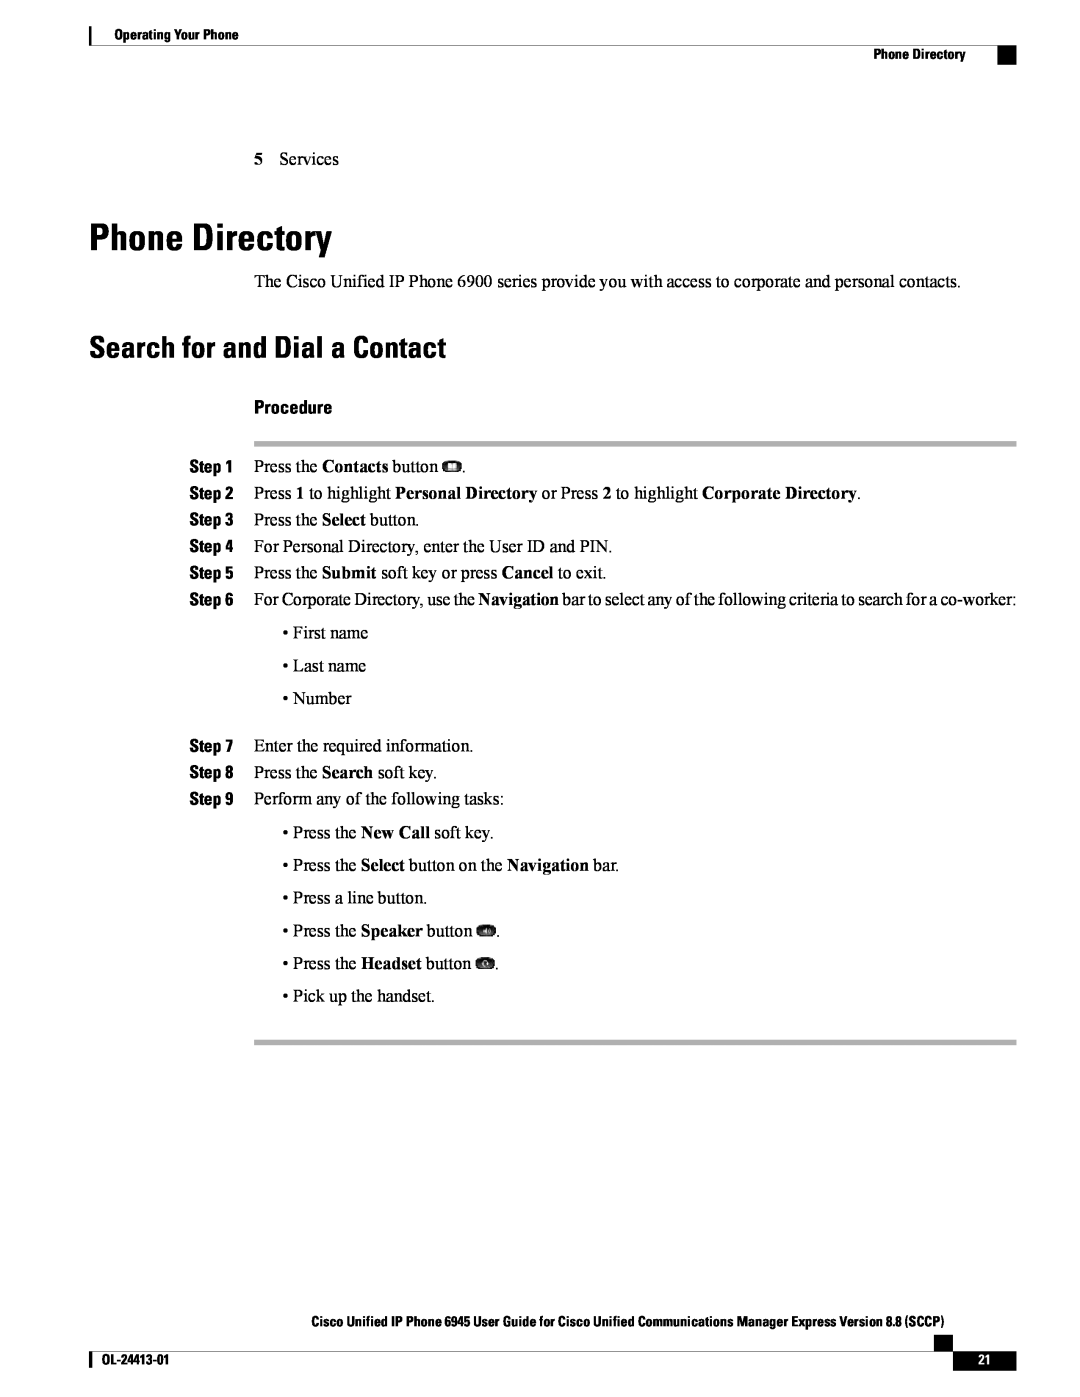 Cisco Systems 6945 manual Phone Directory, Search for and Dial a Contact, Procedure 